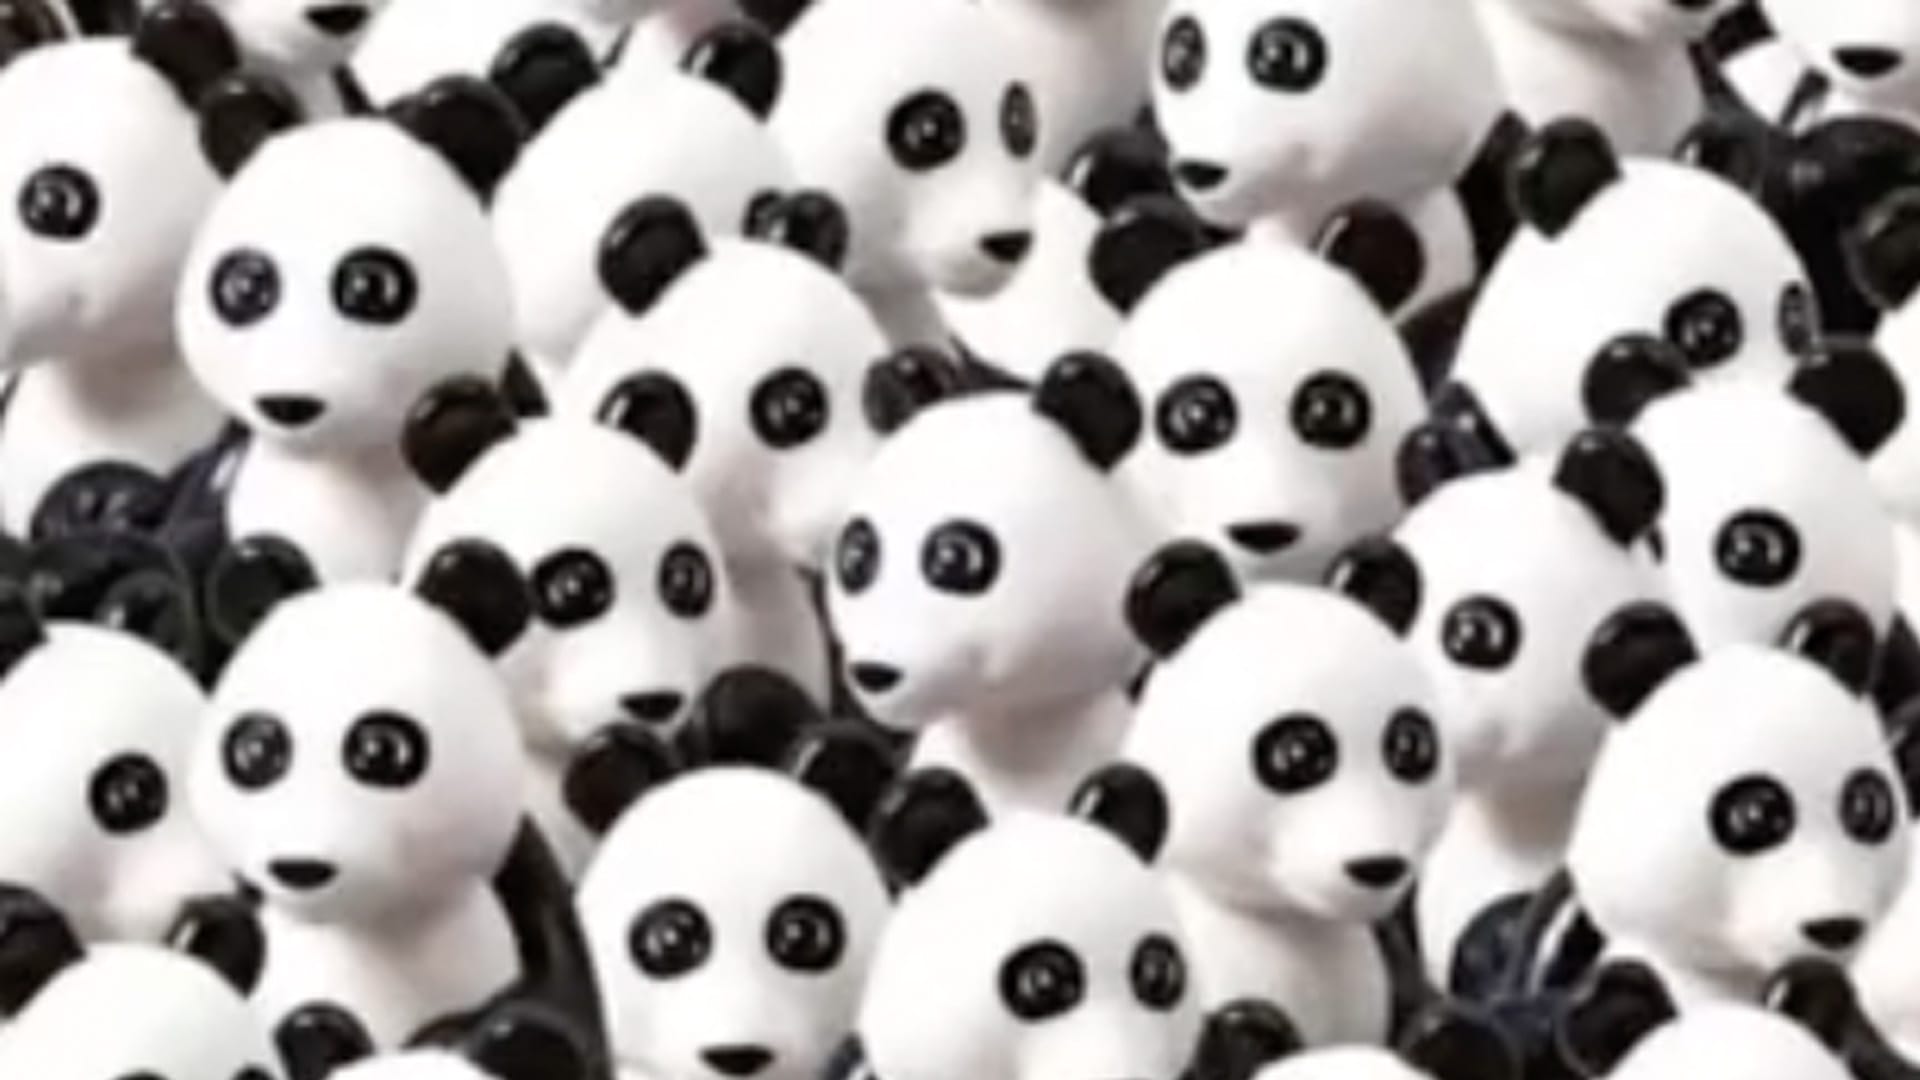 You have 20/20 vision if you can spot the dog hiding among the pandas in less than 15 seconds